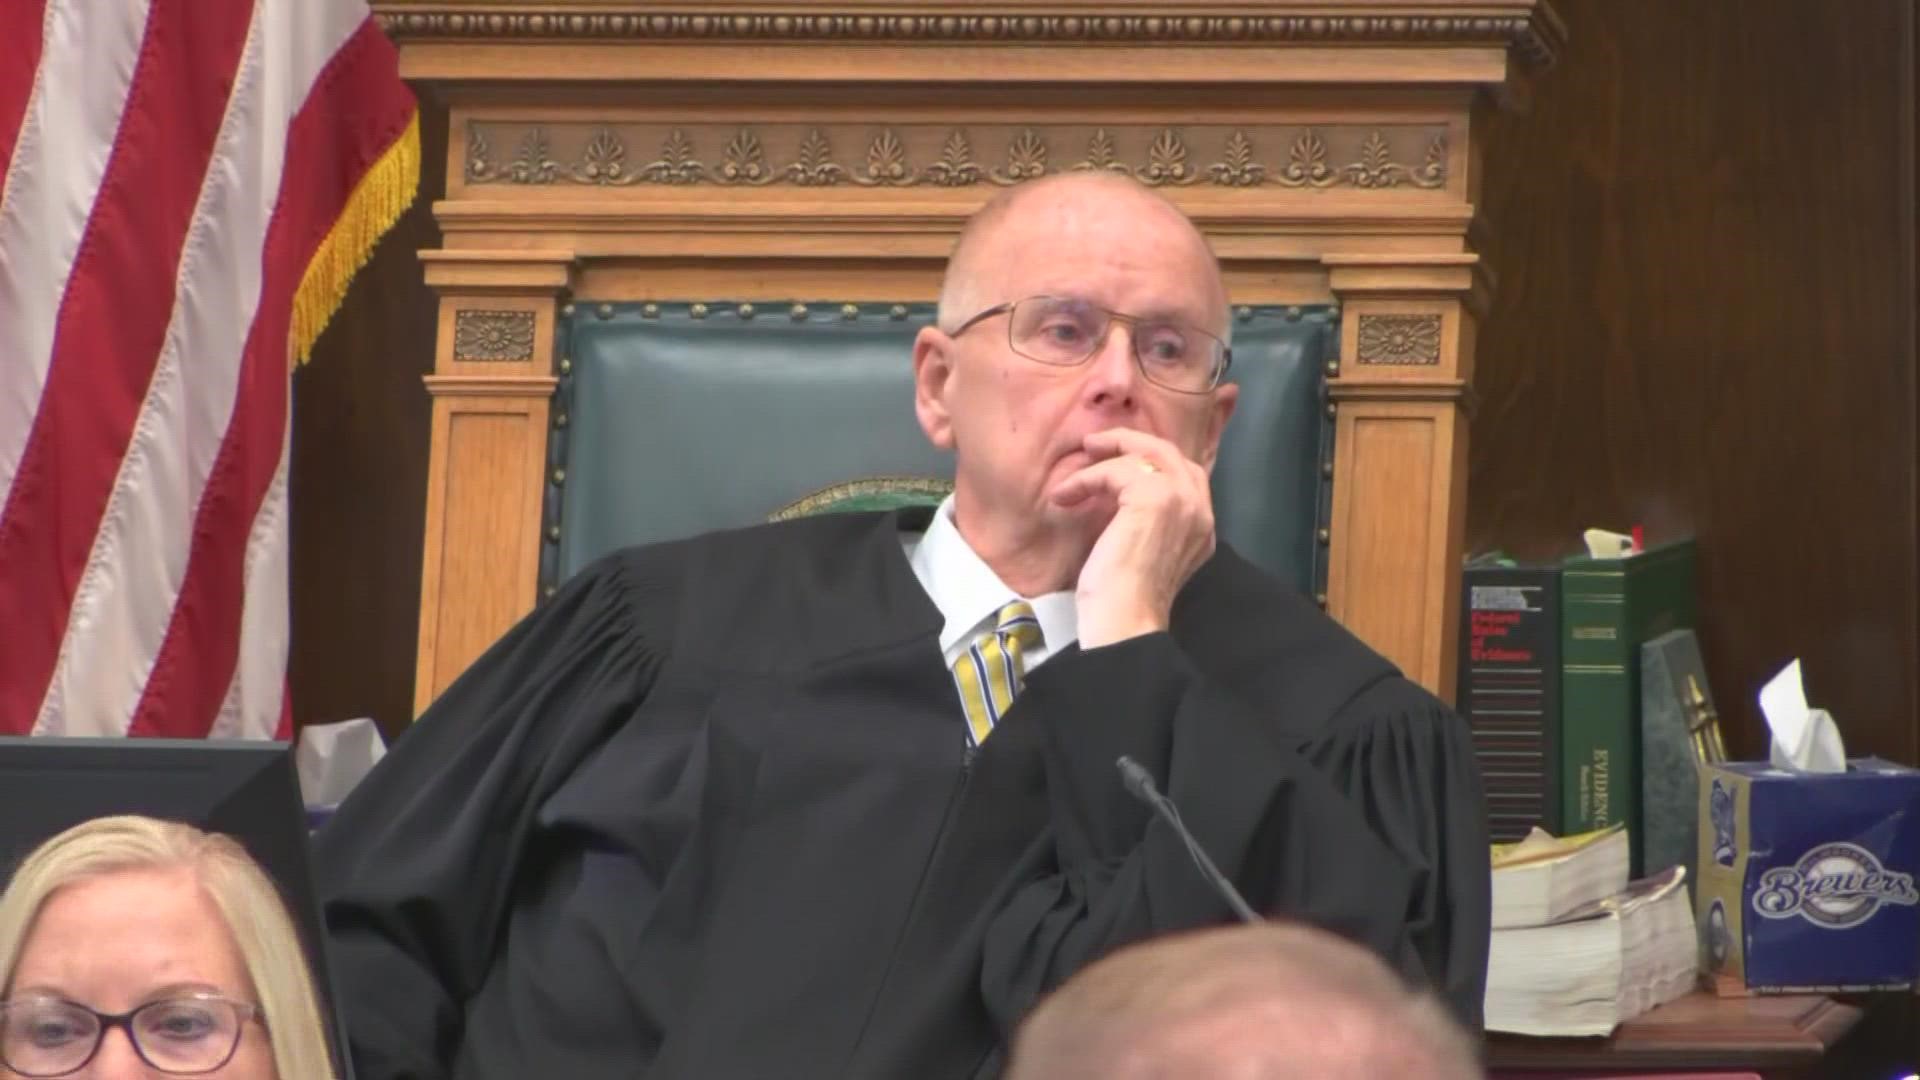 In a tense moment before the jury reentered the courtroom, the judge appears to side with Rittenhouse's defense, warning the prosecution on constitutional issues.